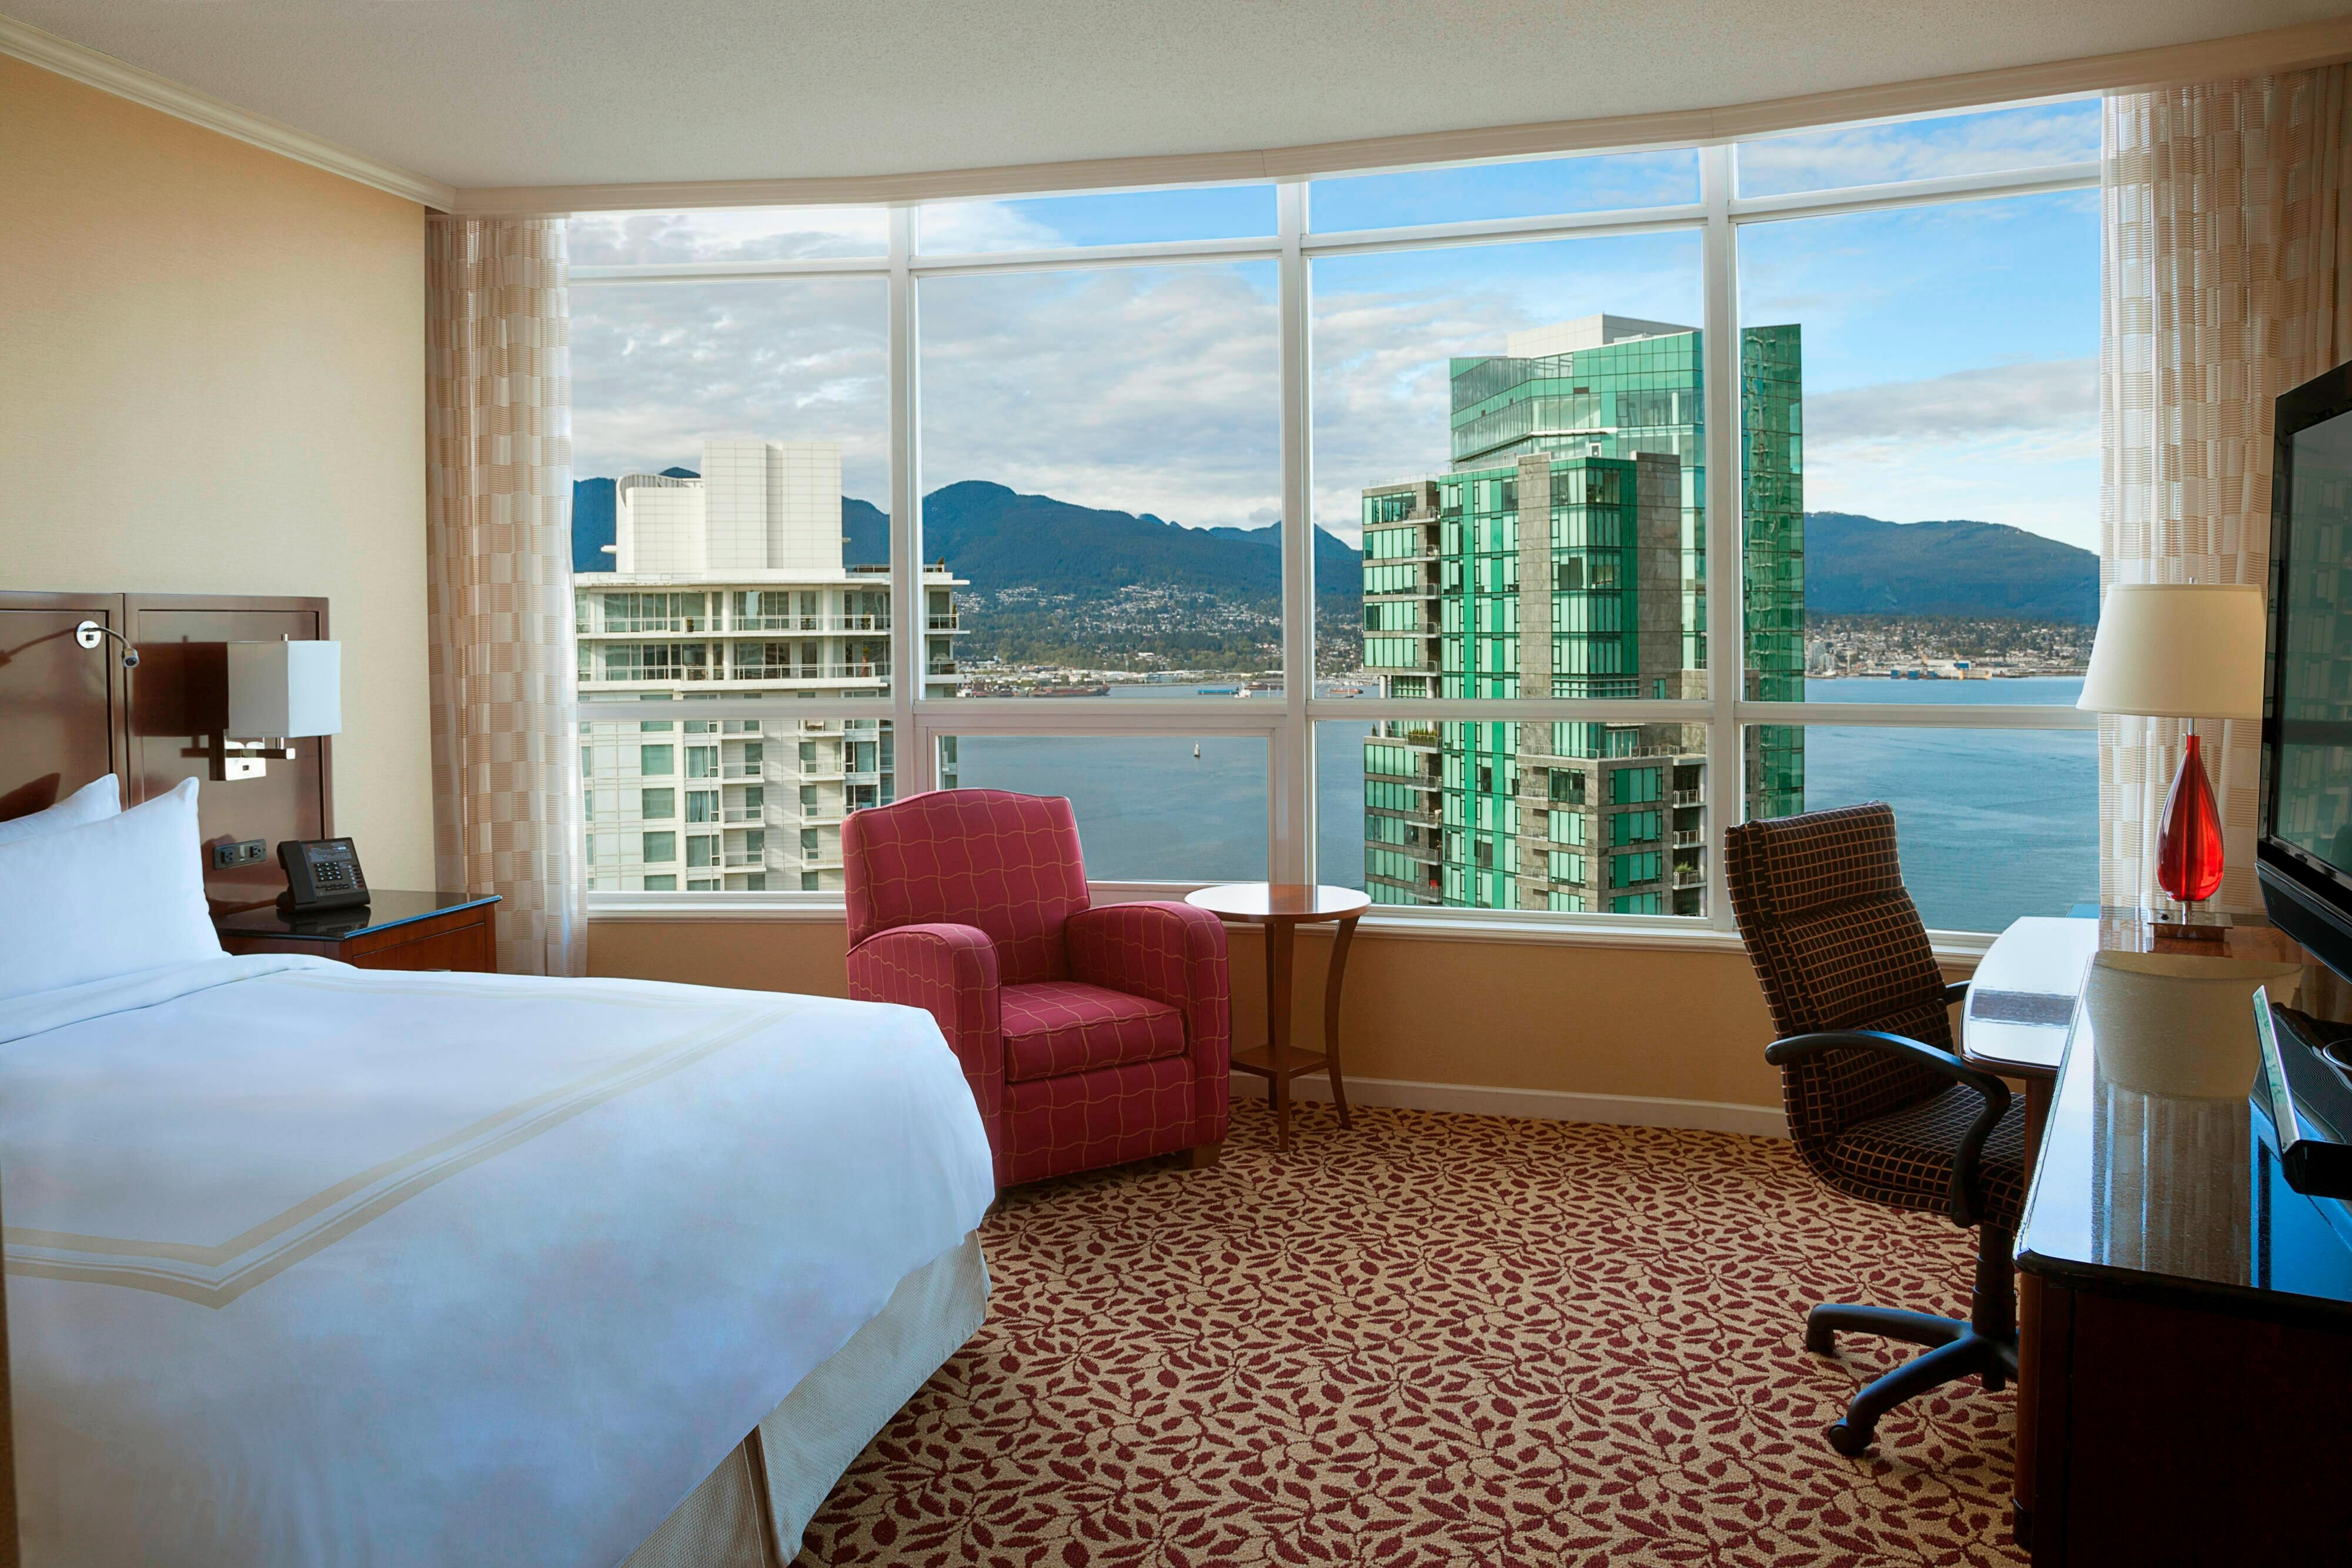 Photo of Vancouver Marriott Pinnacle Downtown Hotel, Vancouver, BC, Canada